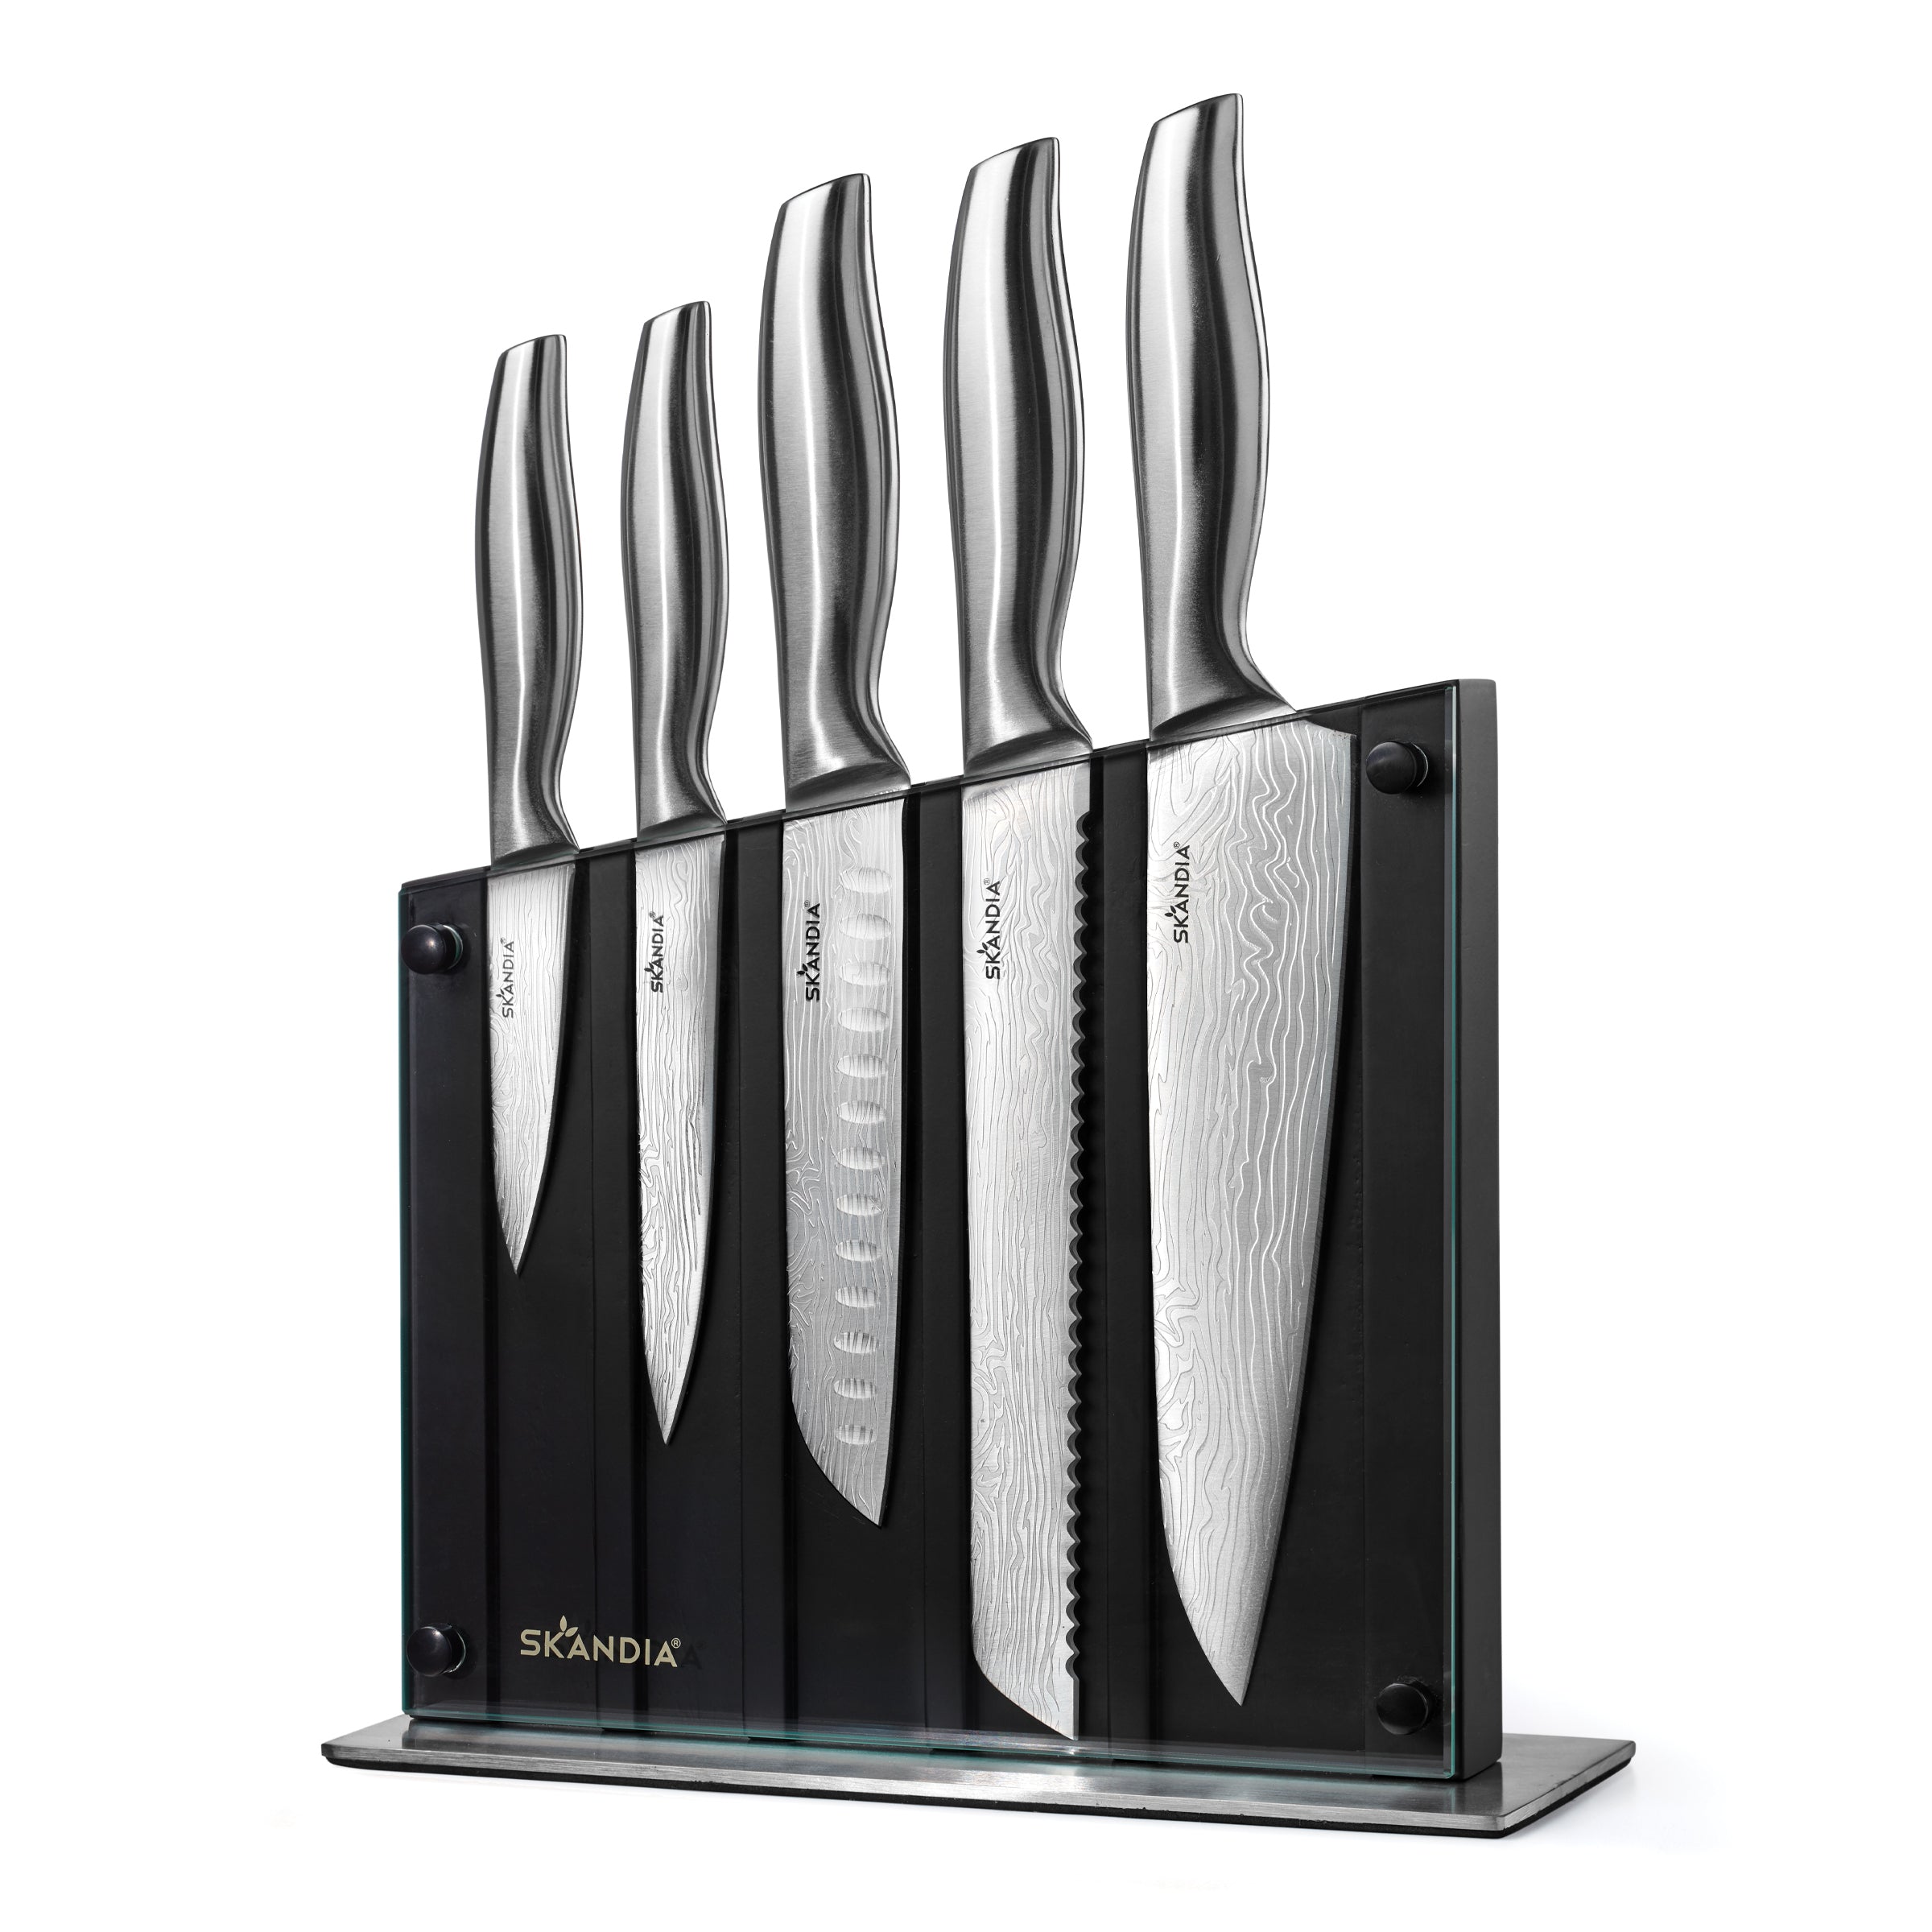 Hampton Forge - Forte 13pc Cutlery Set with Magnetic Block